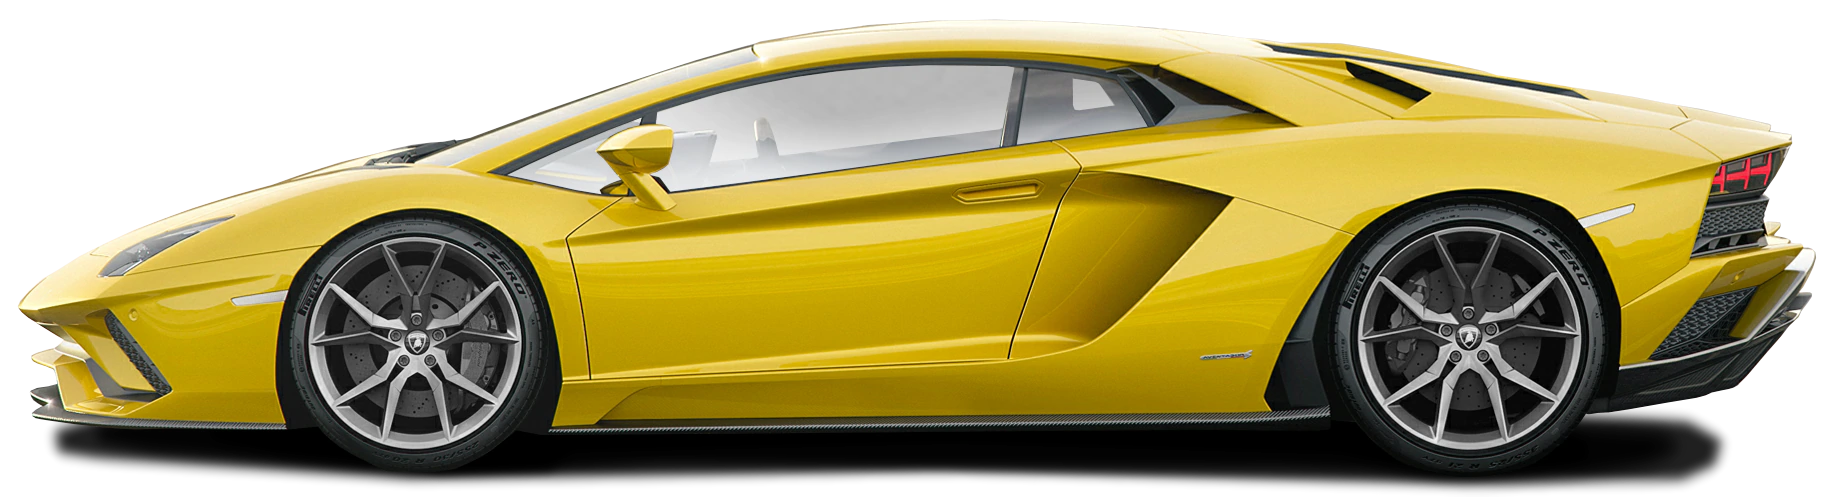 Lamborghini Side Colorful View PNG Image High Quality PNG Image